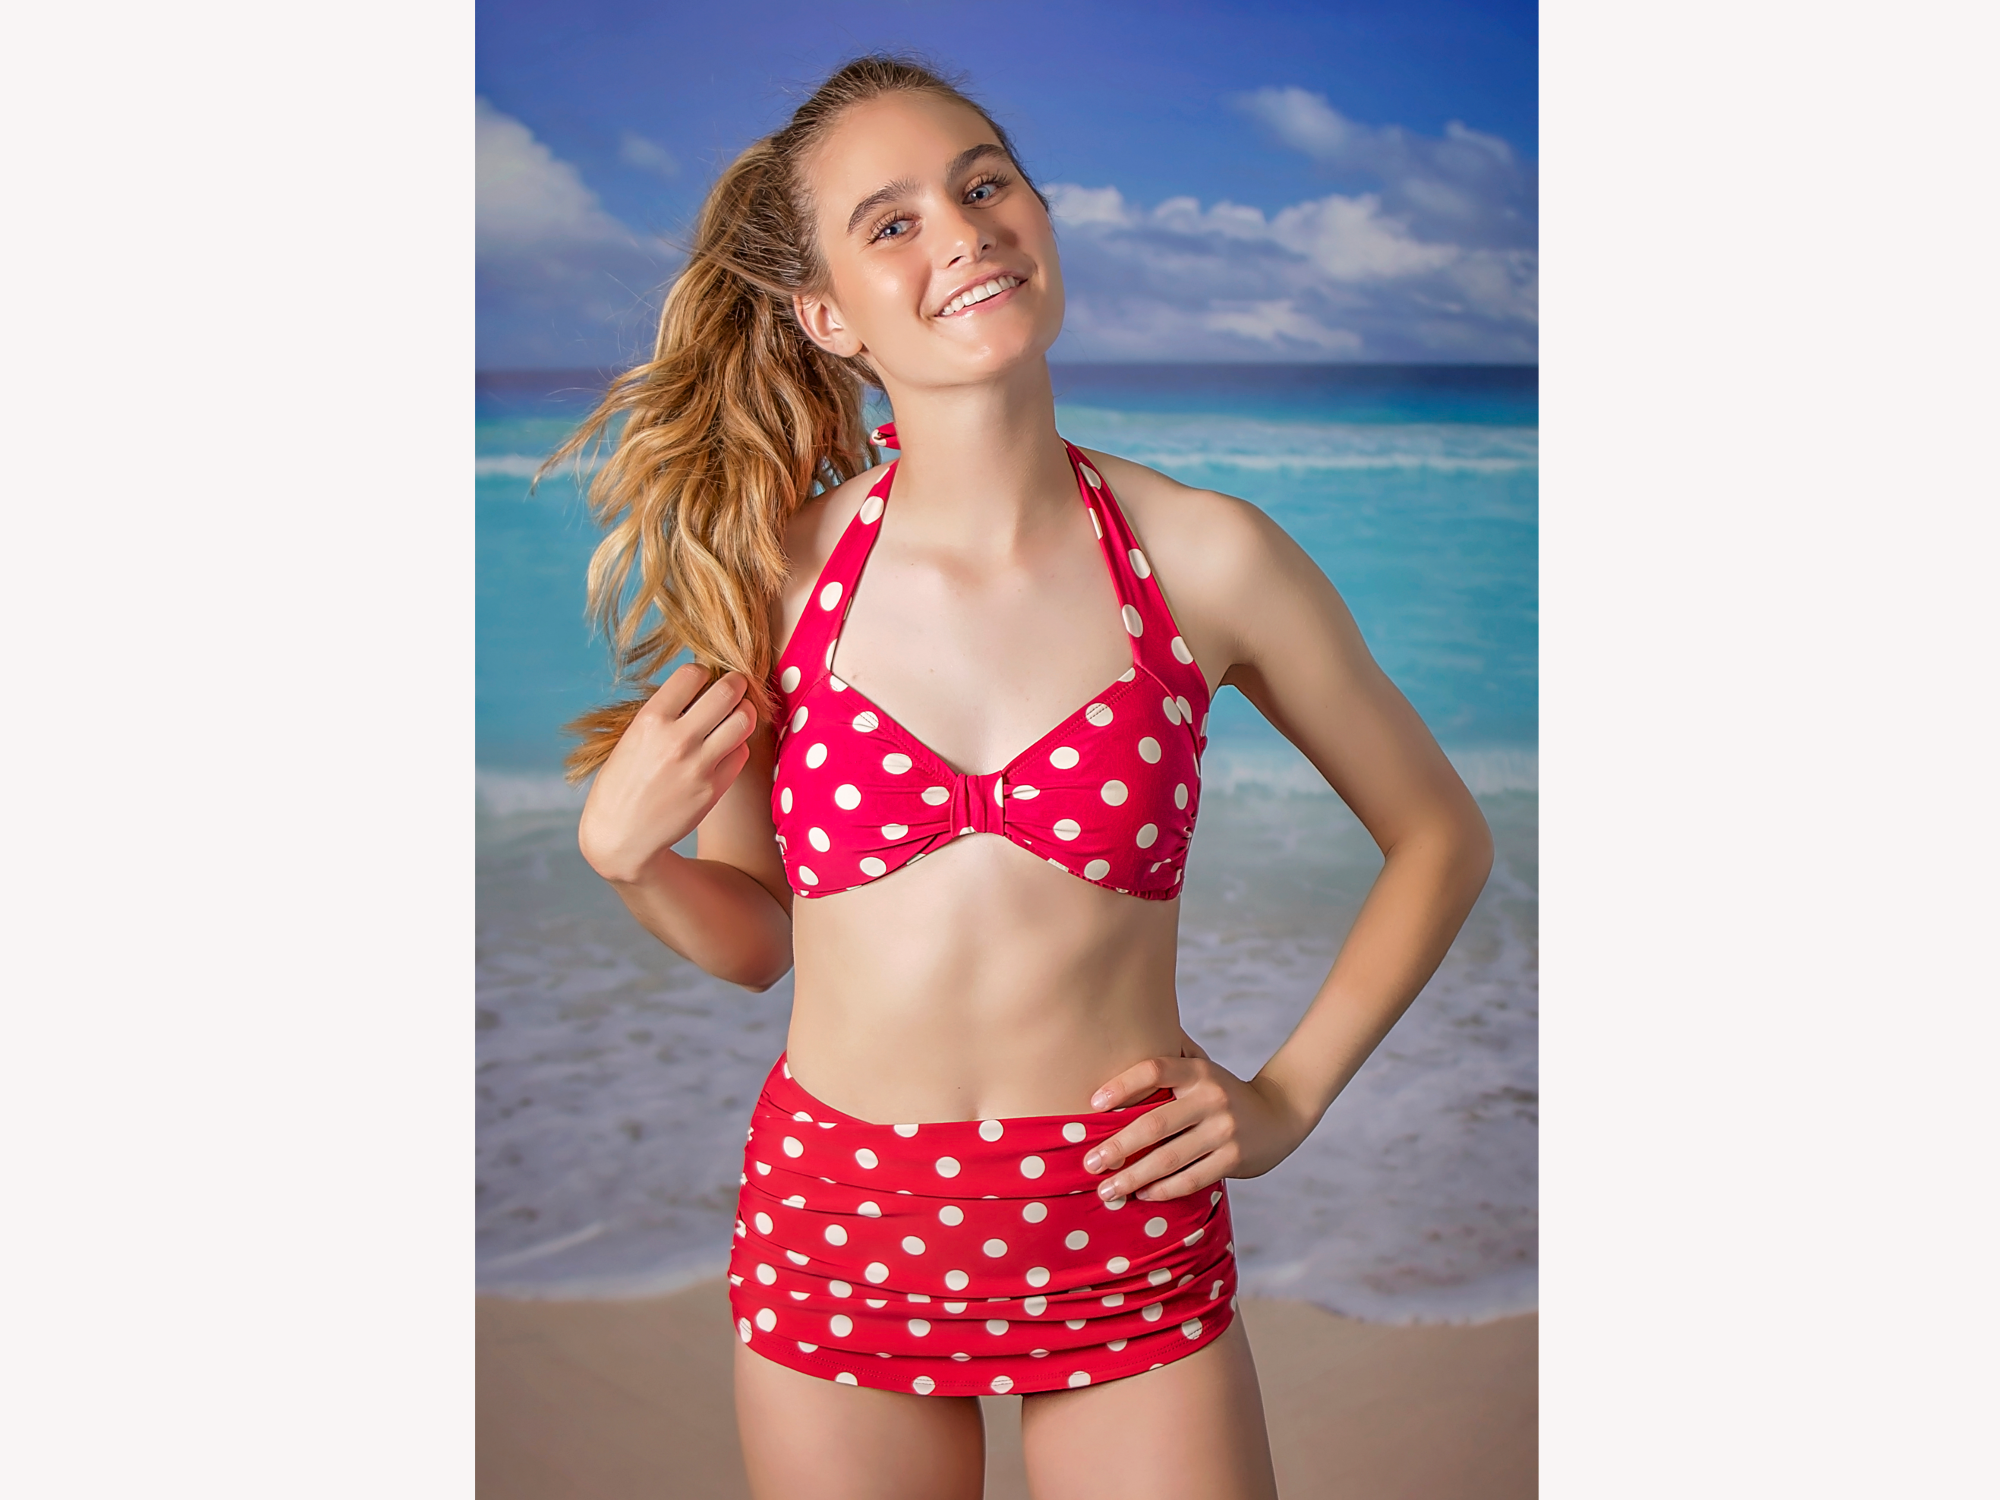 Buy Esther Williams Bathing Suits. skye bathing suits canada. 